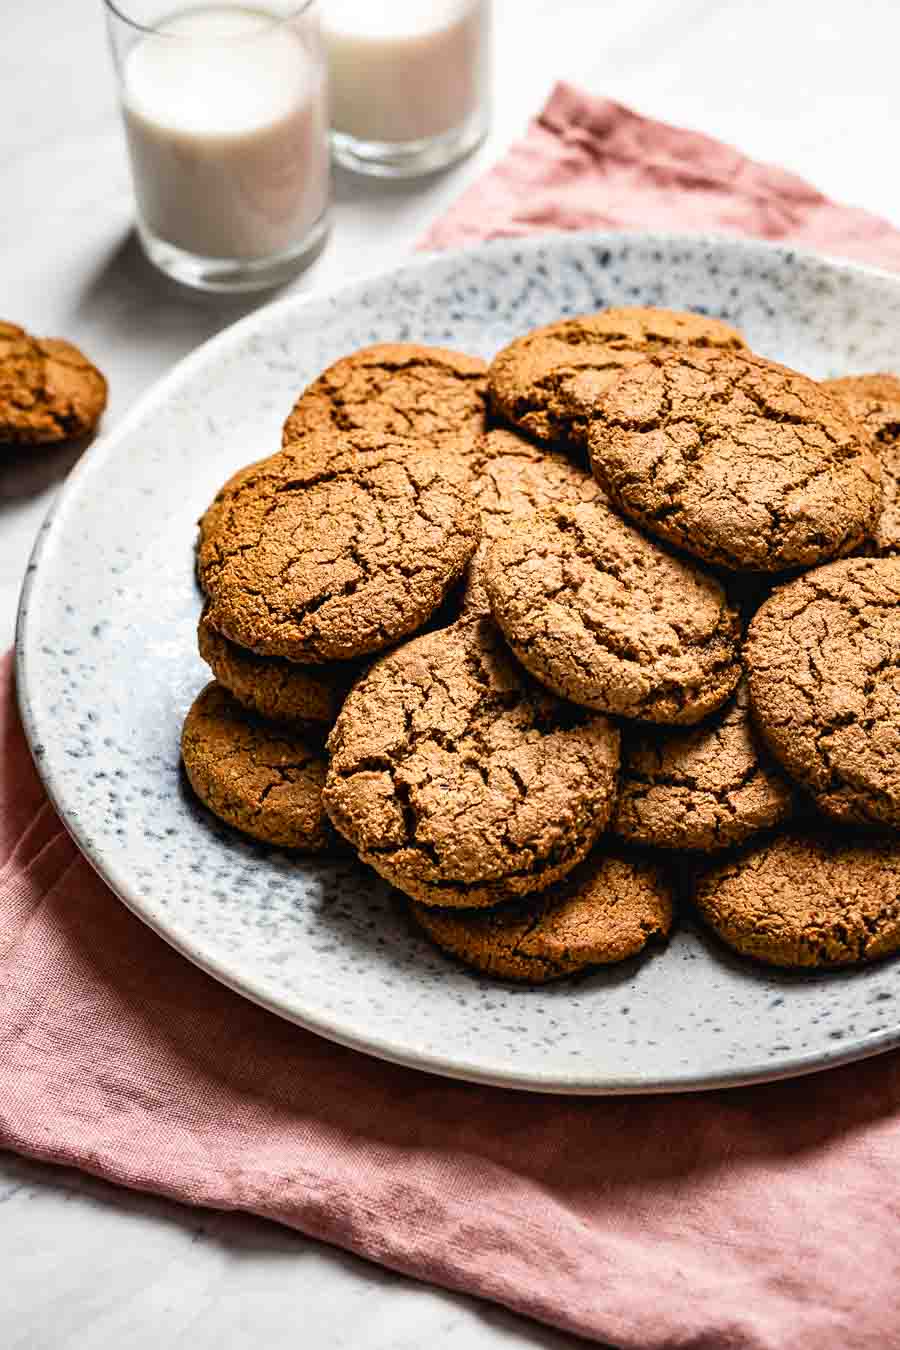 A plate full of paleo gingerbread cookies are served with a glass of milk on the side.